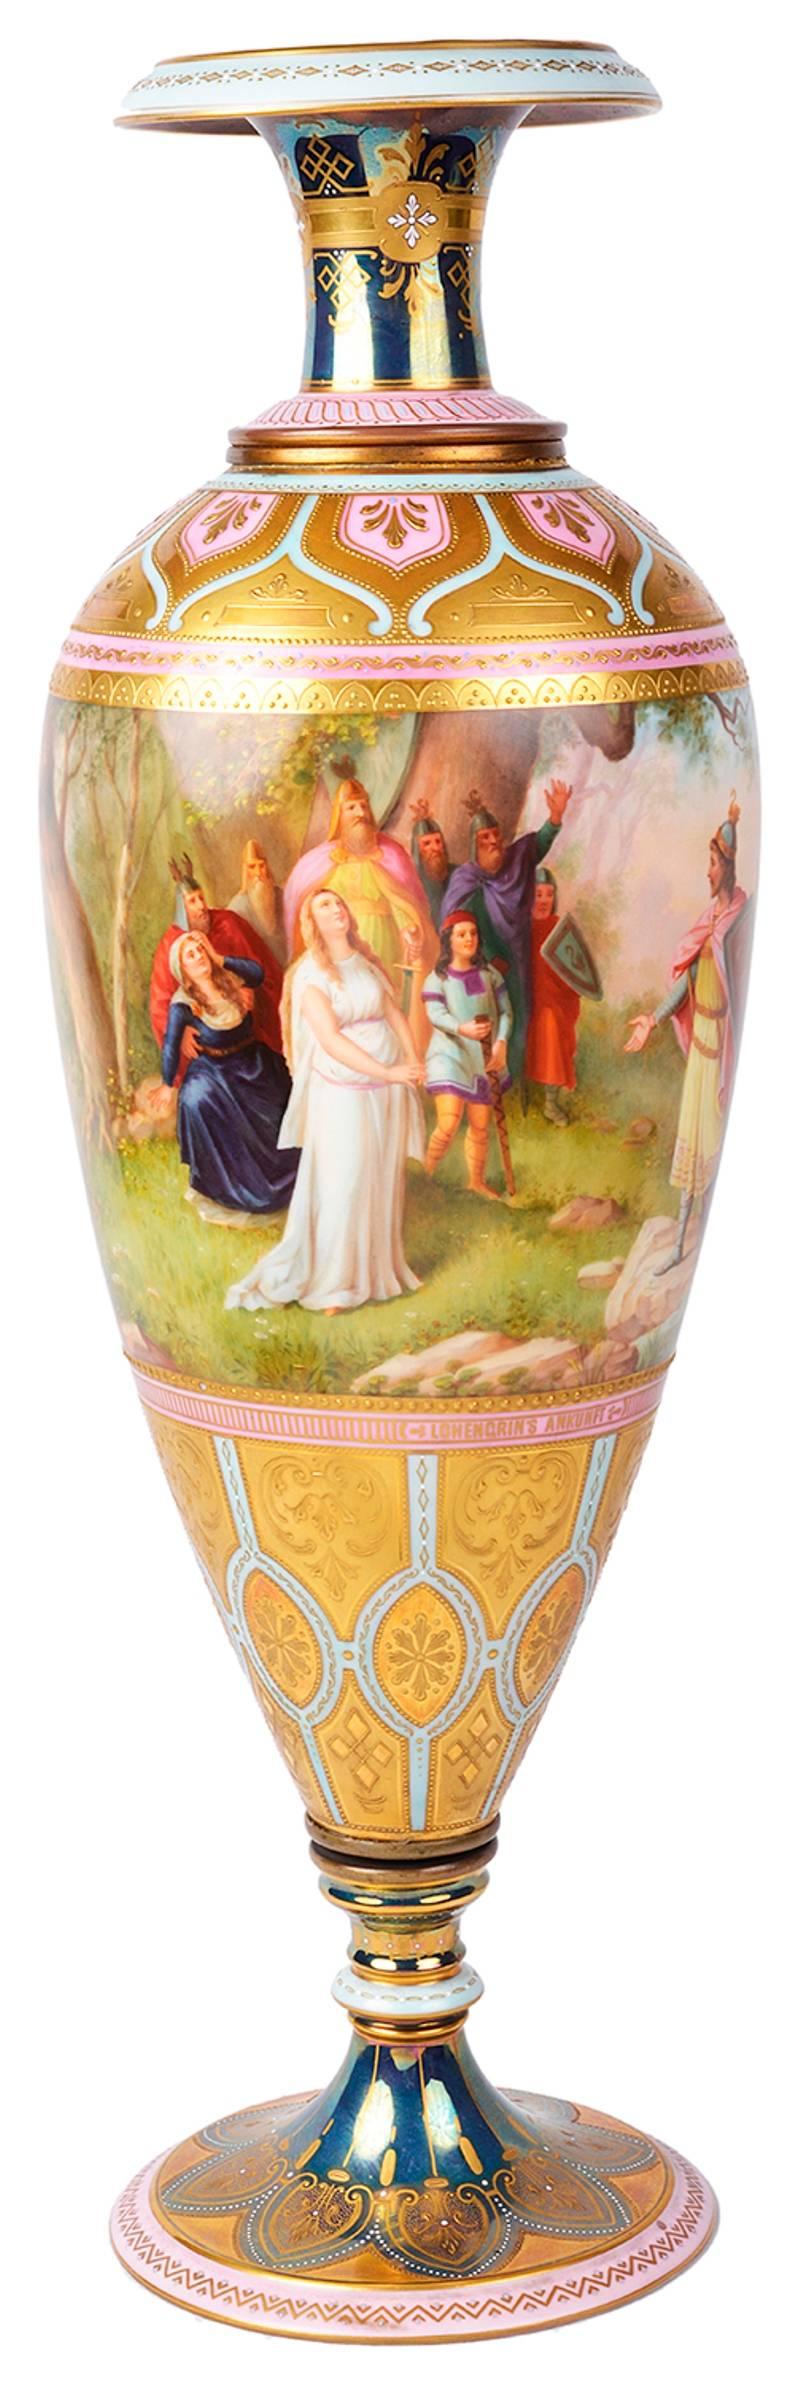 A very good quality 19th century Vienna porcelain vase, depicting classical scenes and gilded borders.